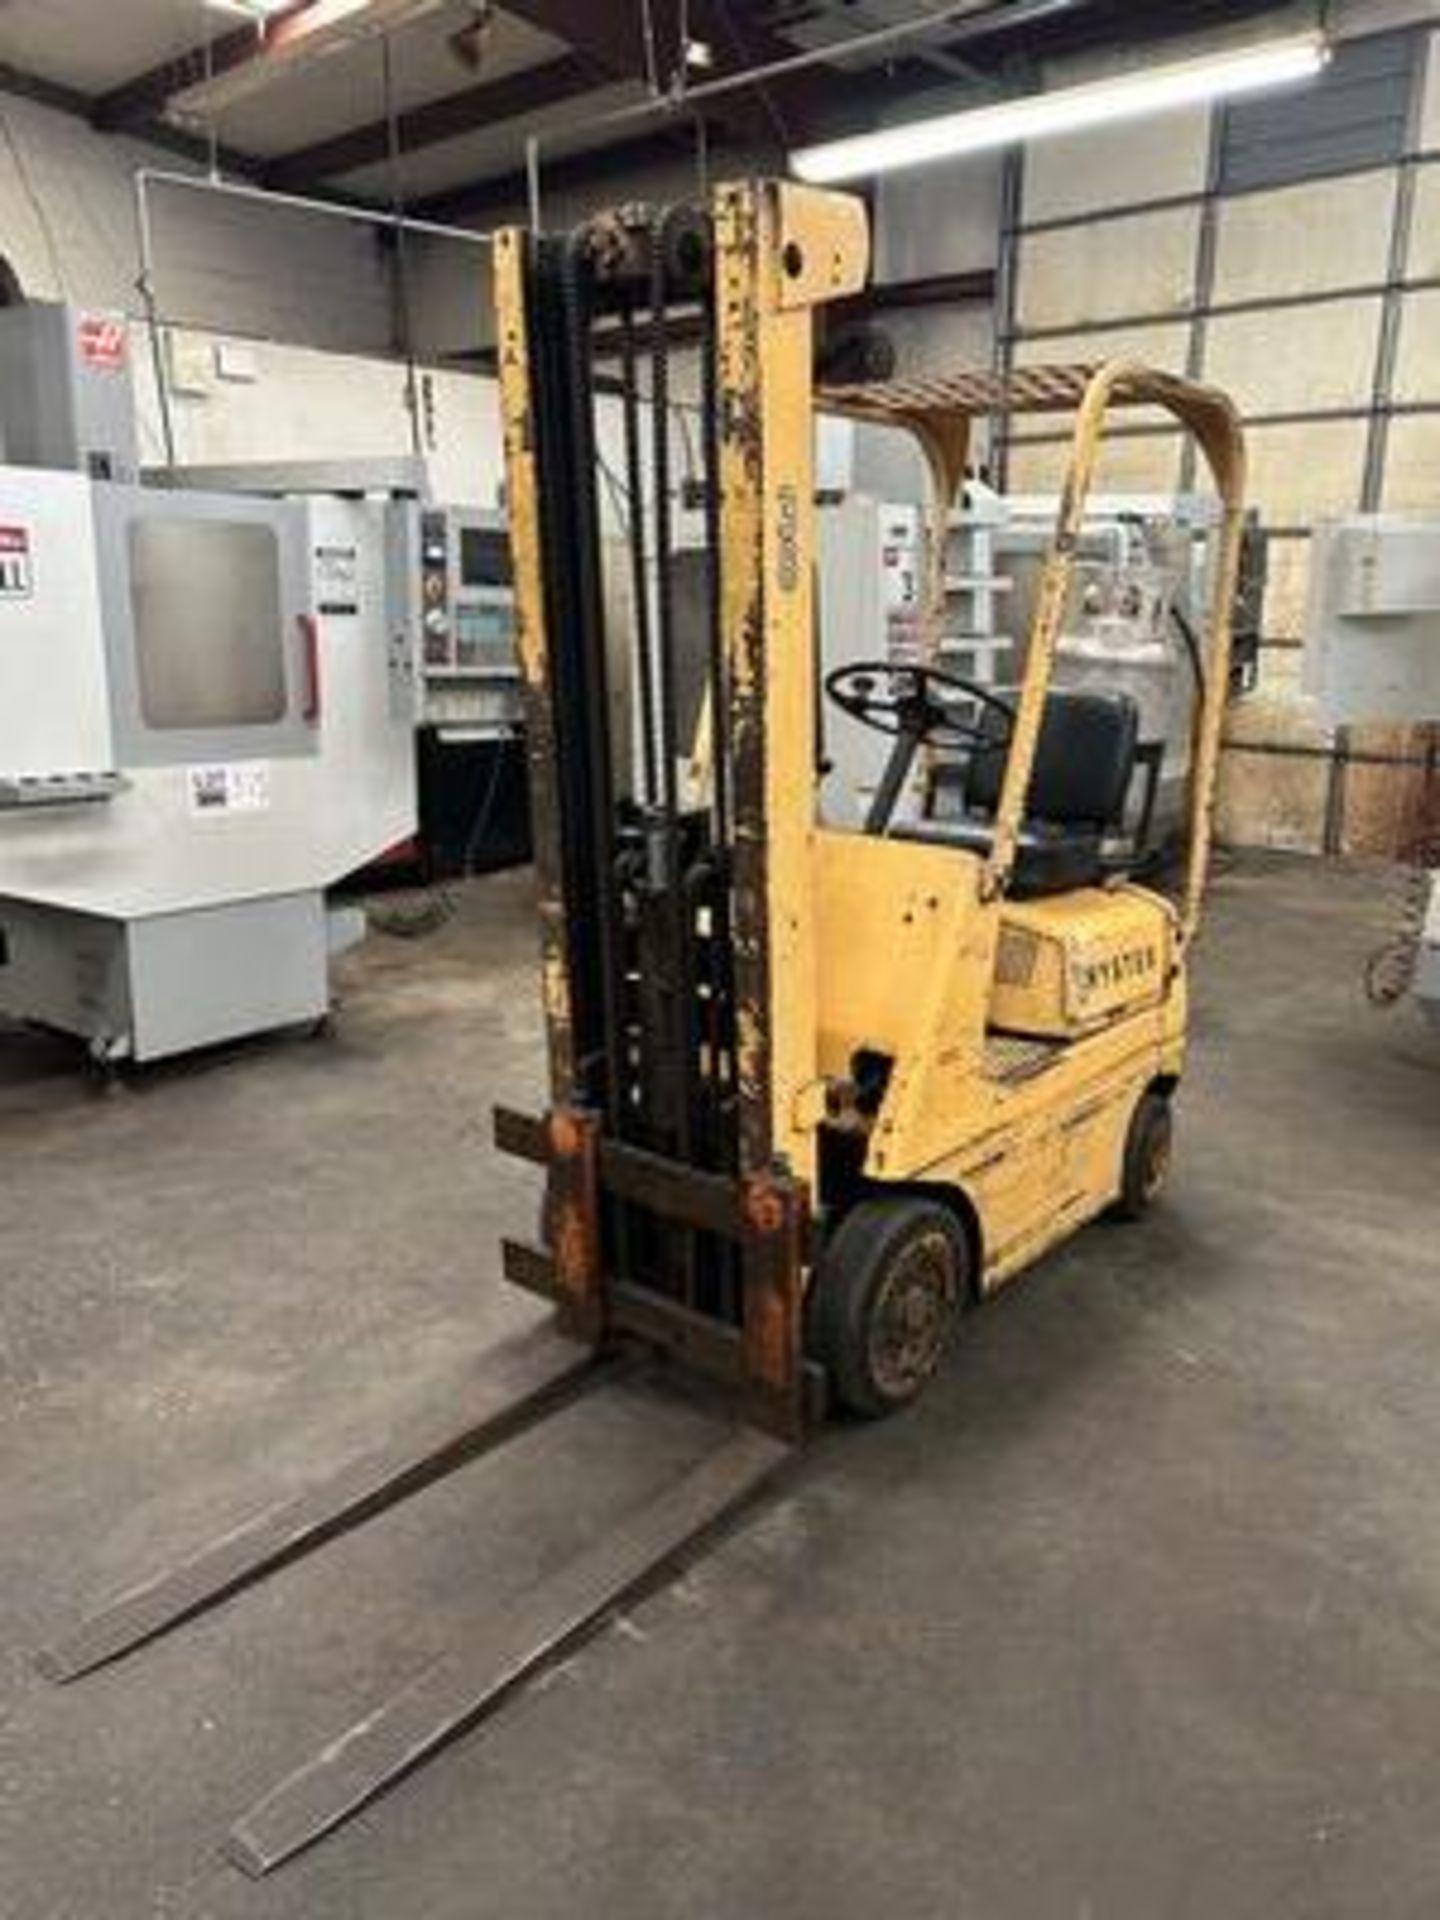 HYSTER LP GAS FORKLIFT, 131" LIFT HT., ROPS, SOLID TIRES, 2,500# CAP., M/N S20A, (0556 HRS) - Image 2 of 2